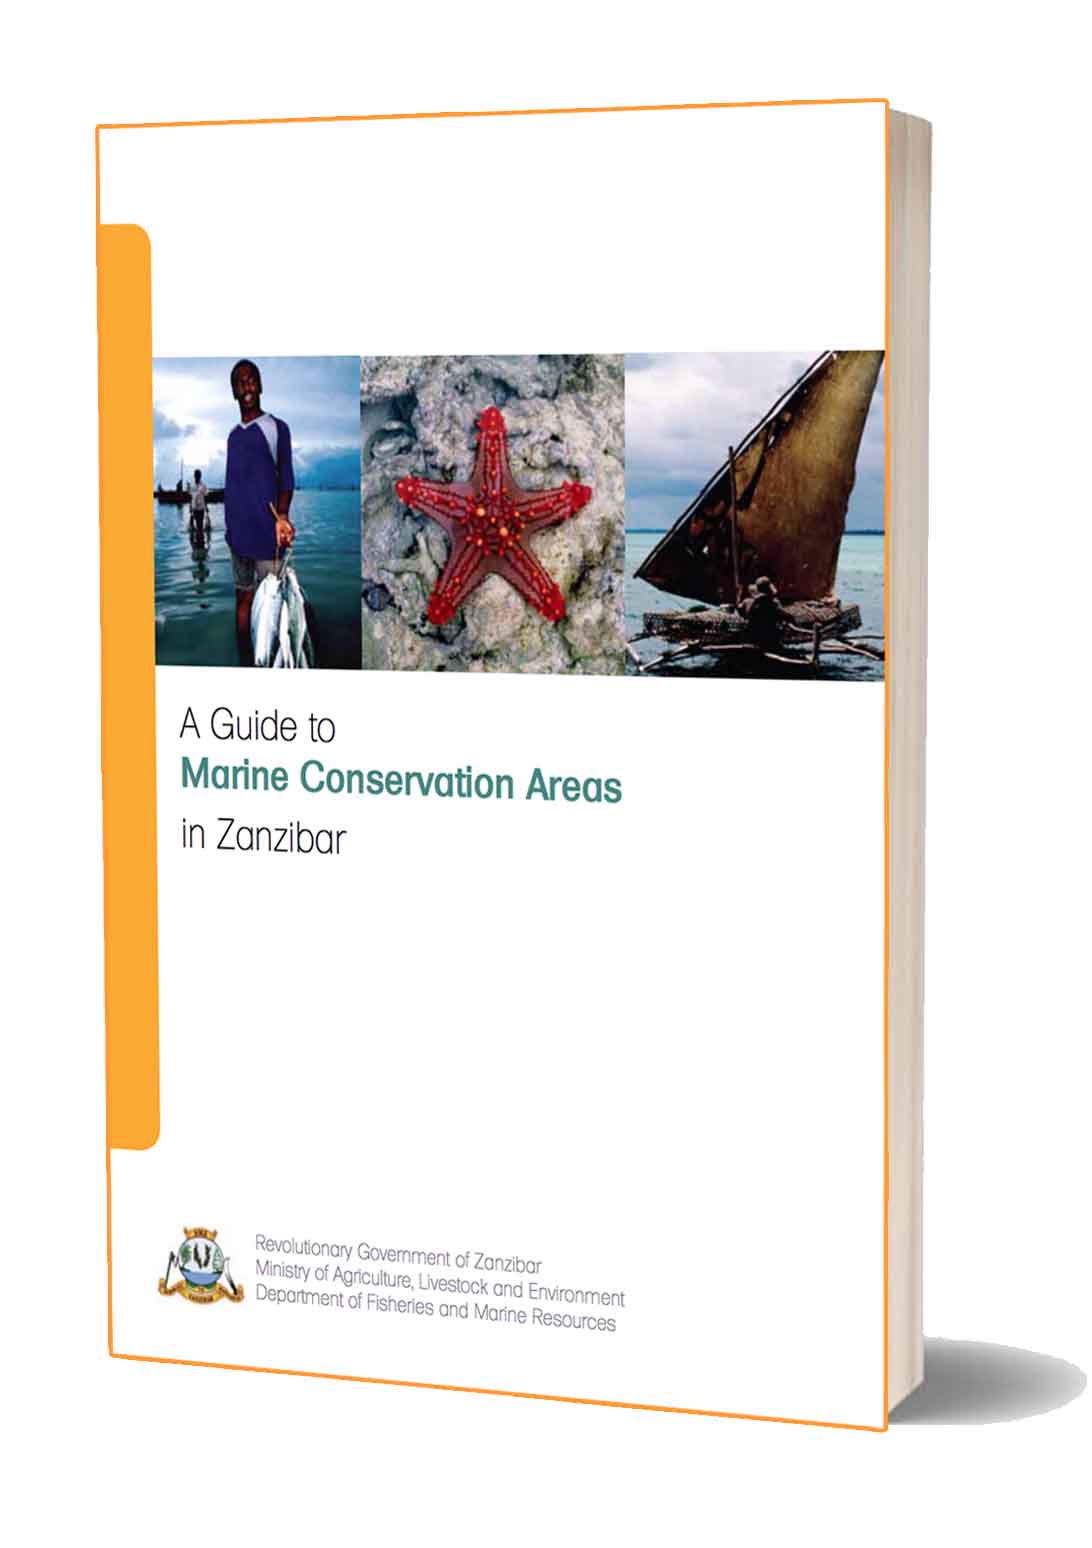 Zanzibar Guide to Marine Conservation Areas - click to download